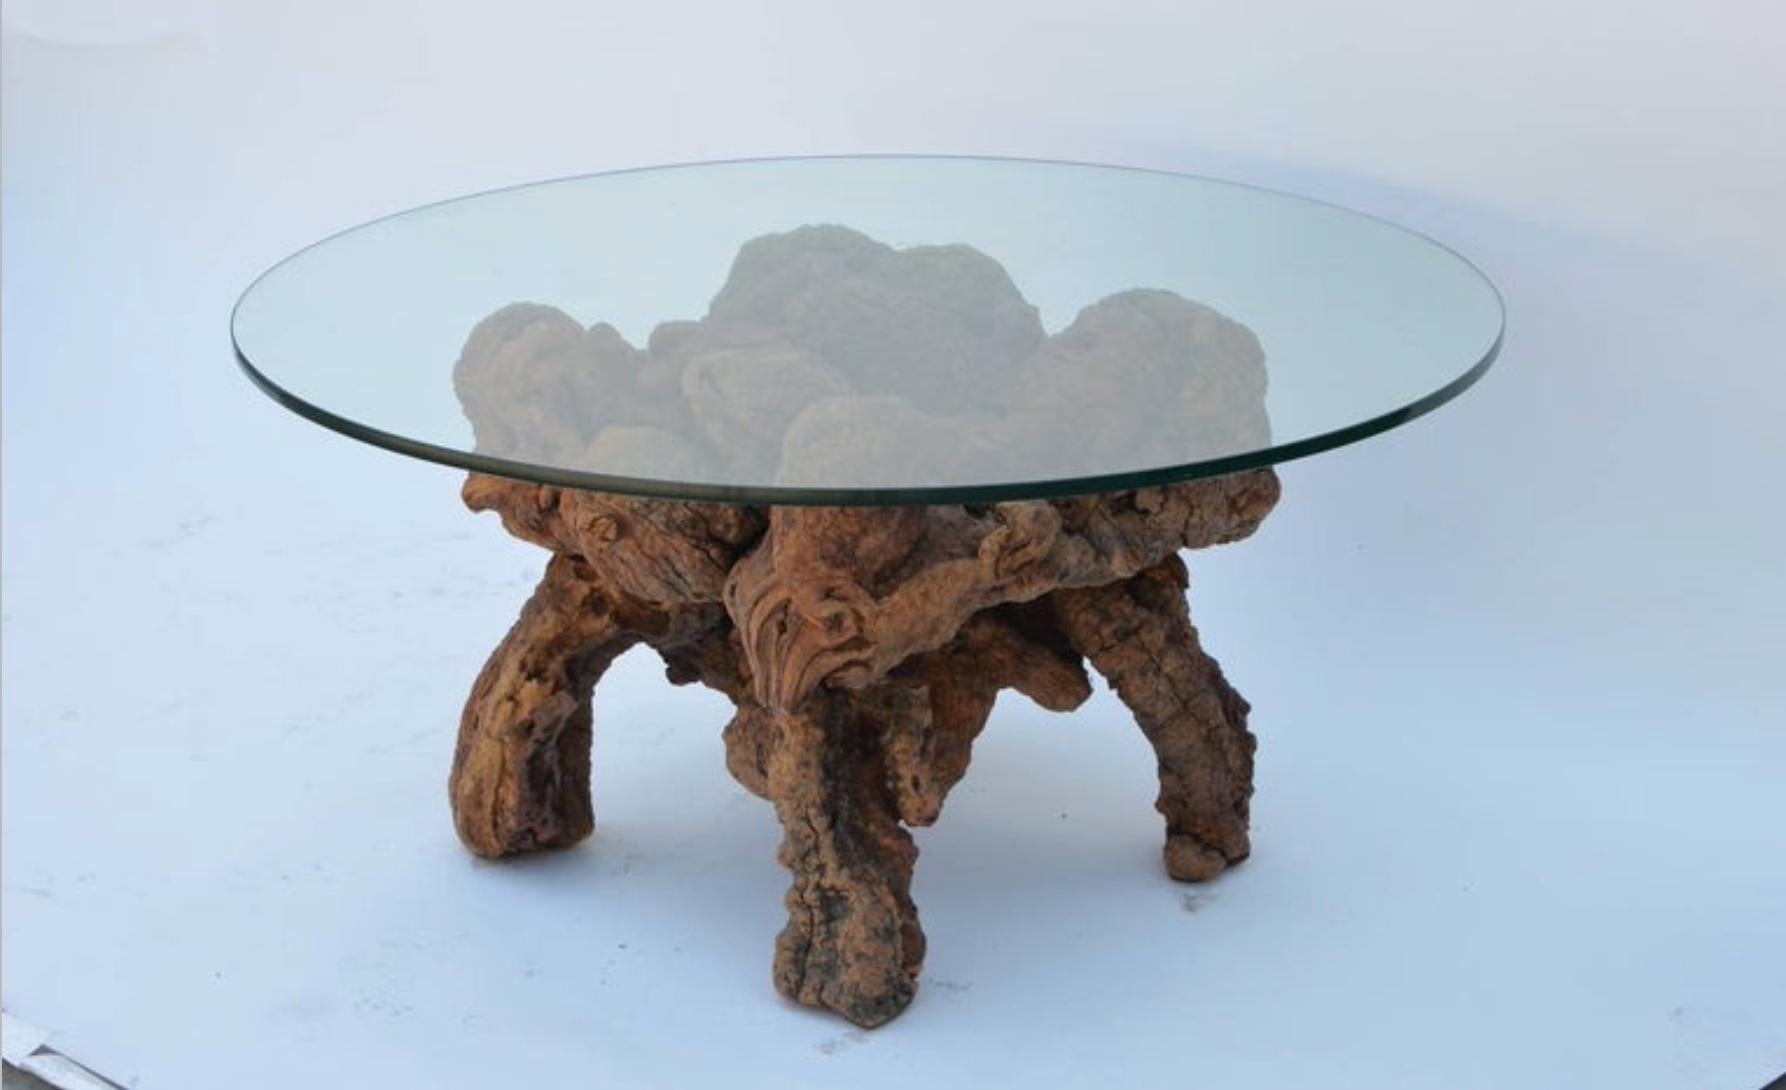 Organic modern Quadripod wood and glass coffee table. Sculptural natural bog wood base contrasting with the simple glass top (1/2 in. thickness).